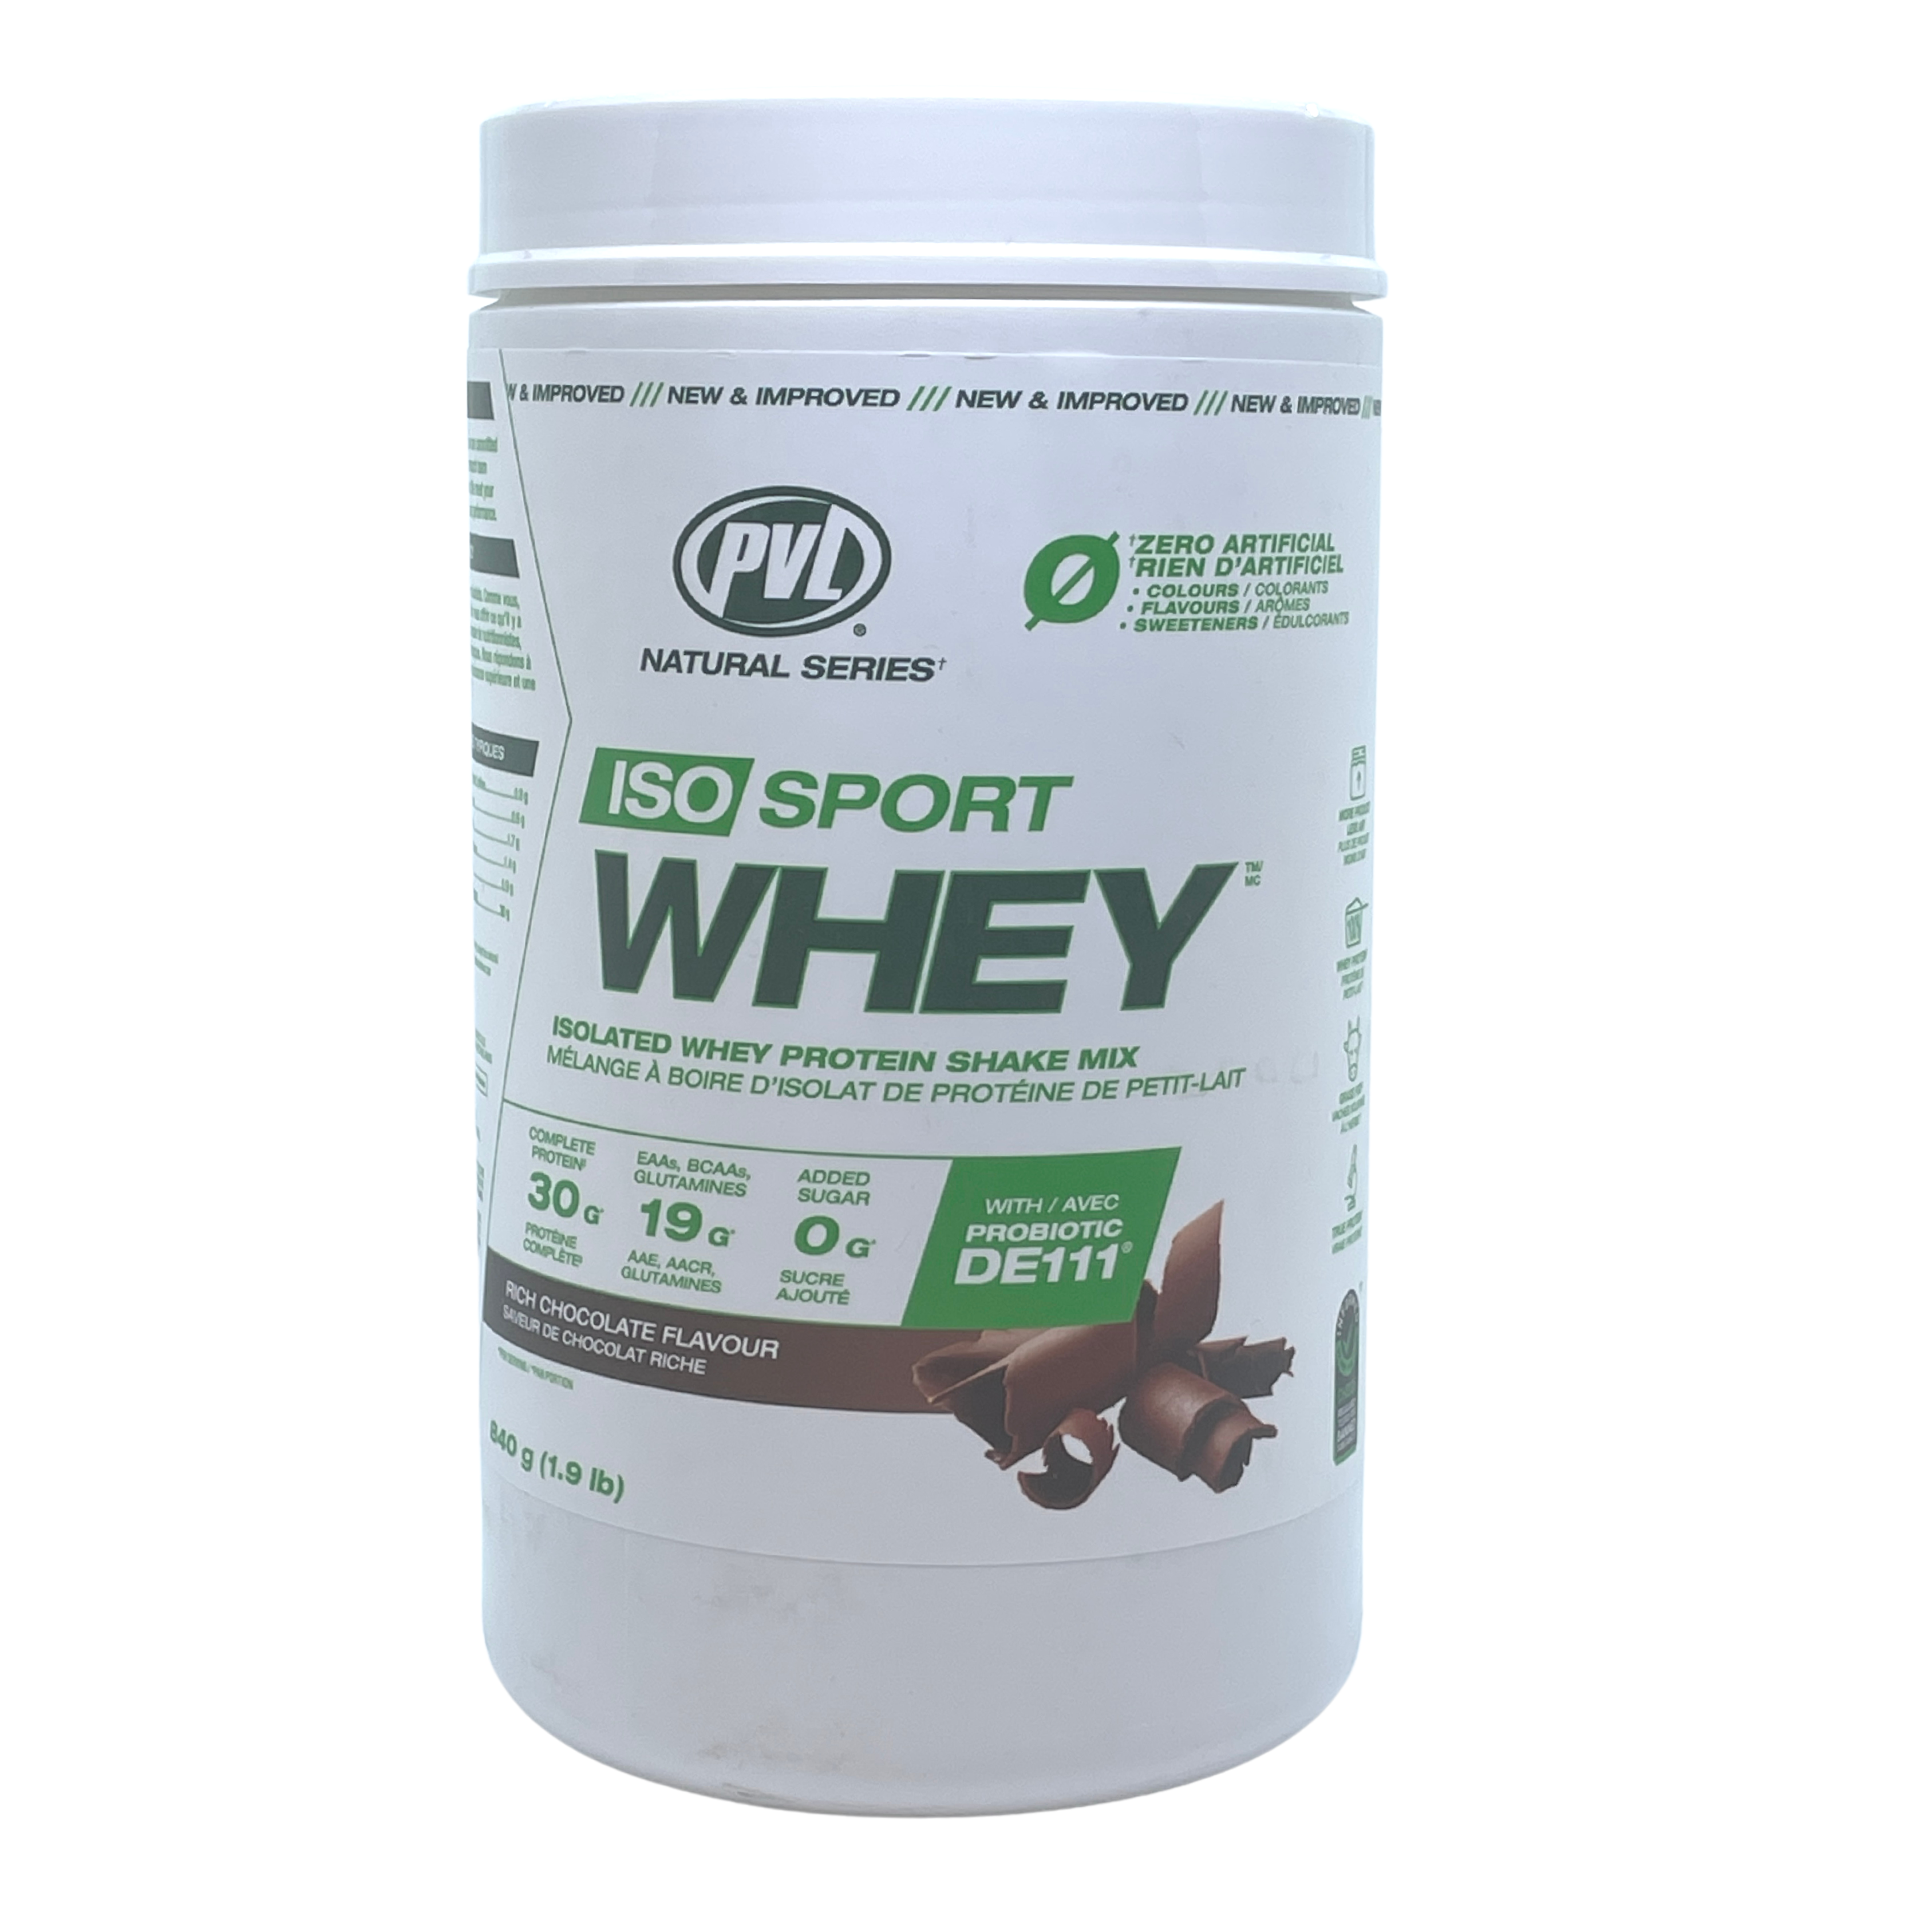 PVL Iso Sport Whey - Rich Chocolate (840g) - Lifestyle Markets